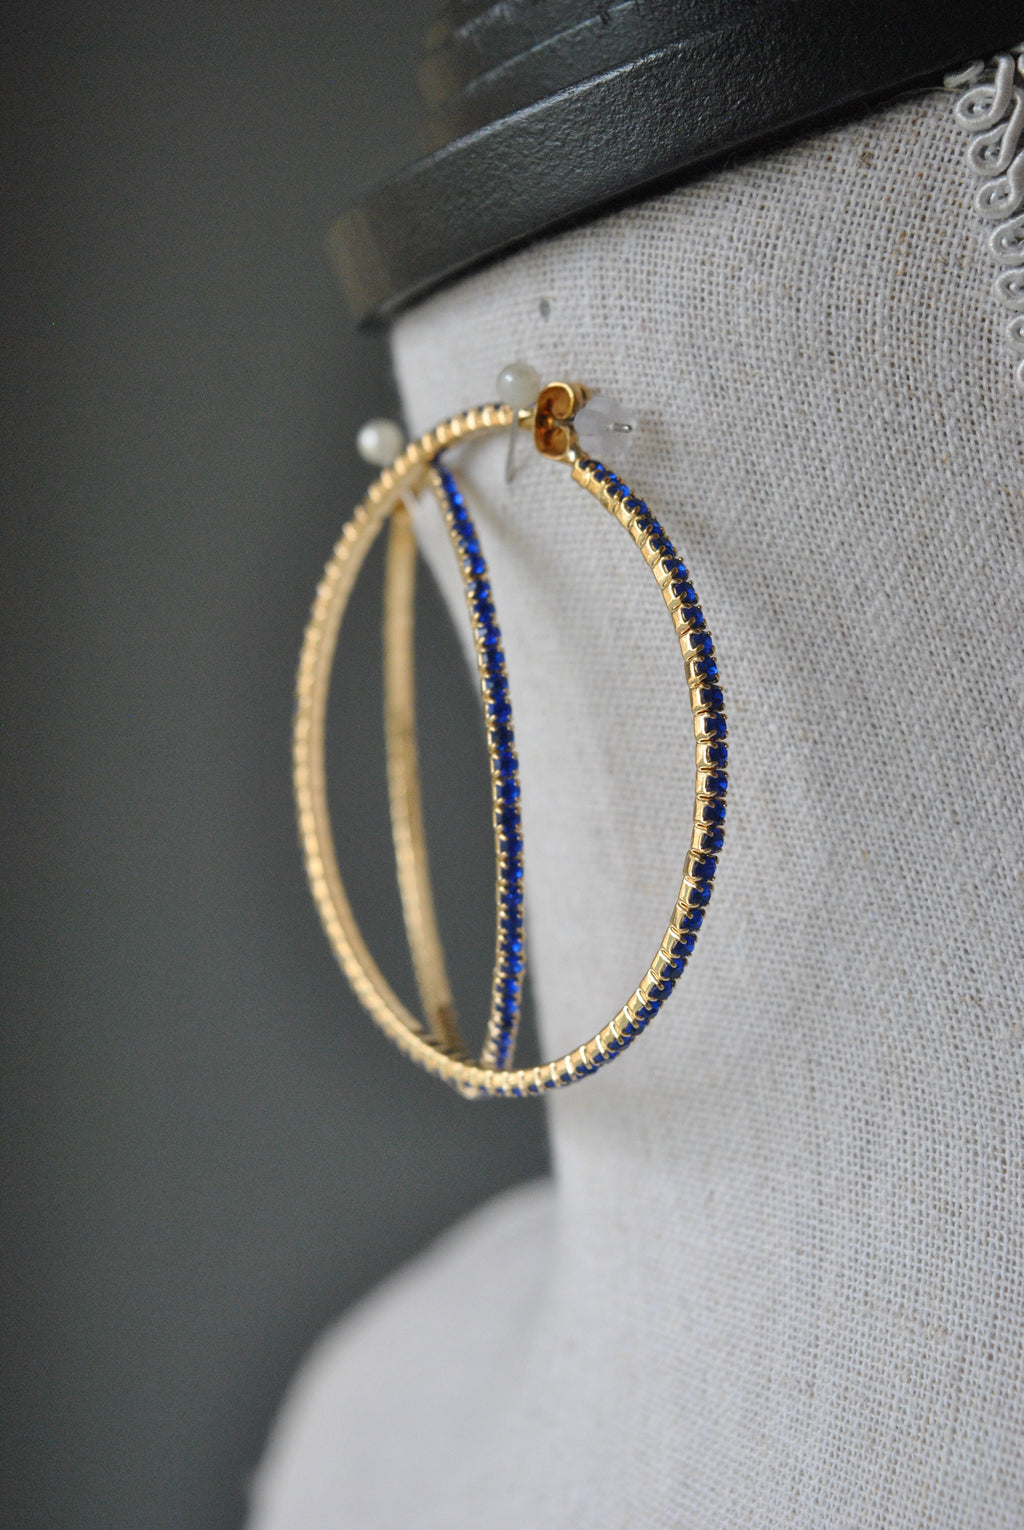 FASHION COLLECTION - COBALT BLUE CRYSTALS GOLD HOOP EARRINGS